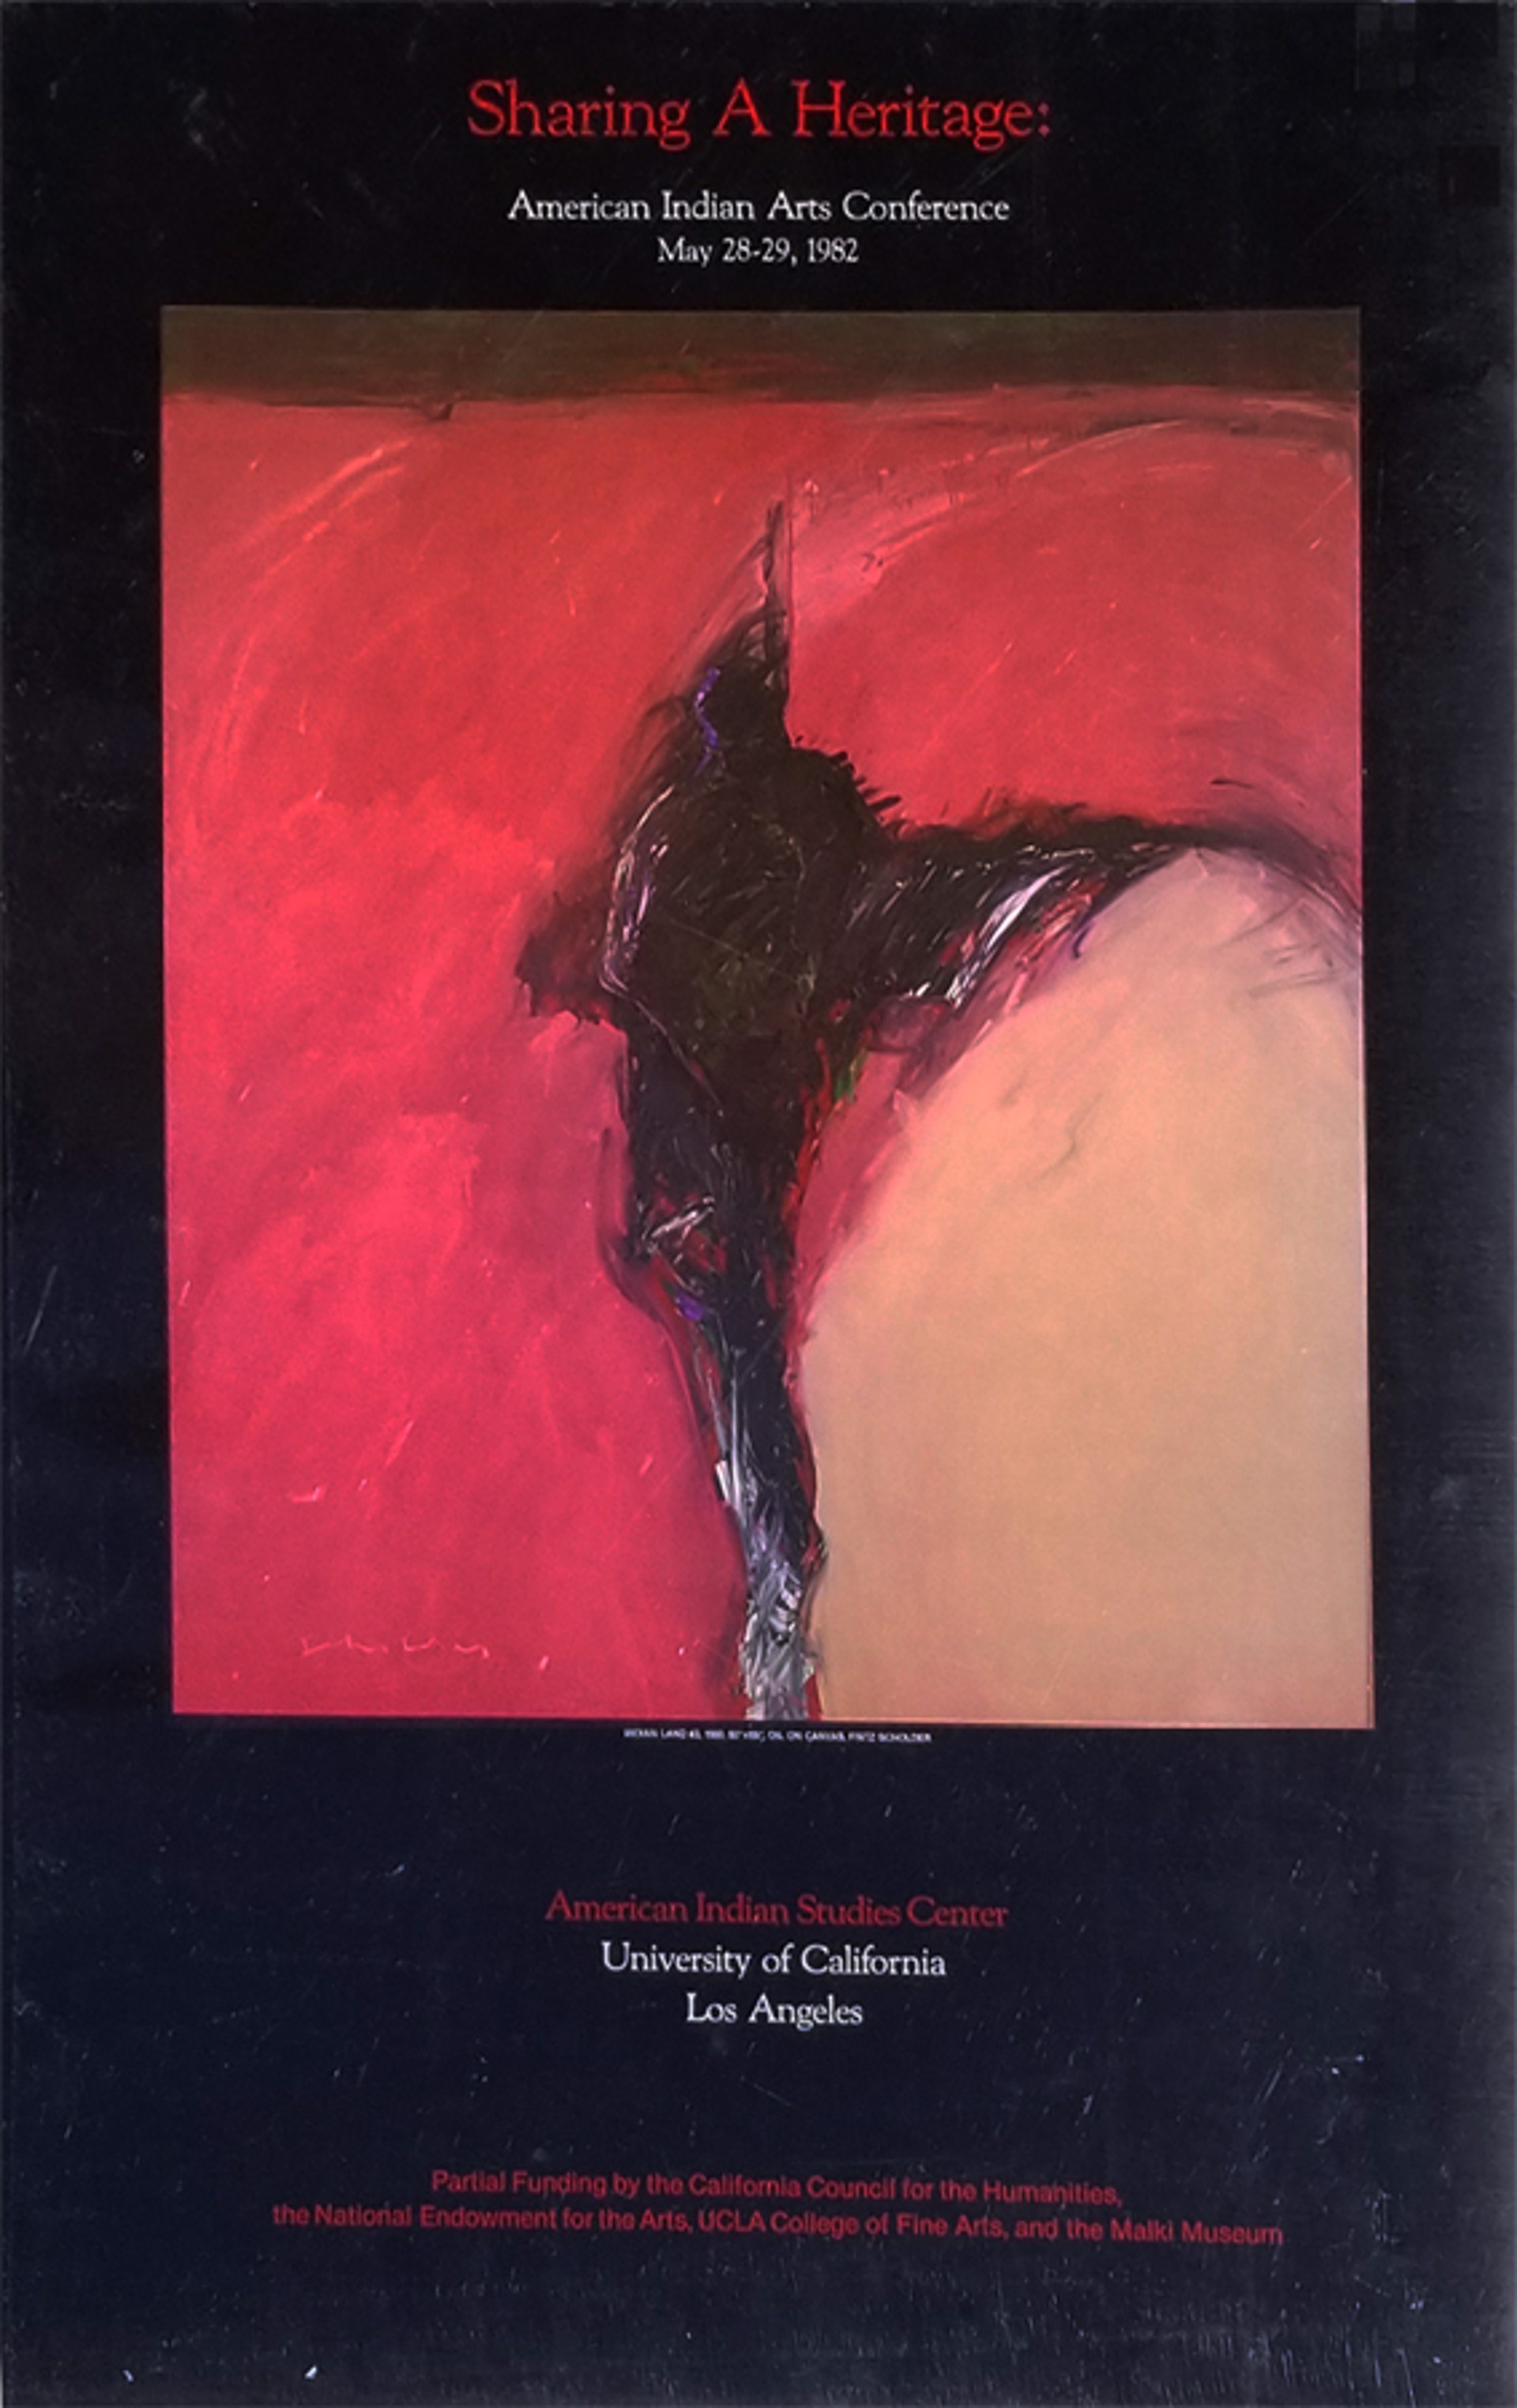 Sharing a Heritage Poster by Fritz Scholder